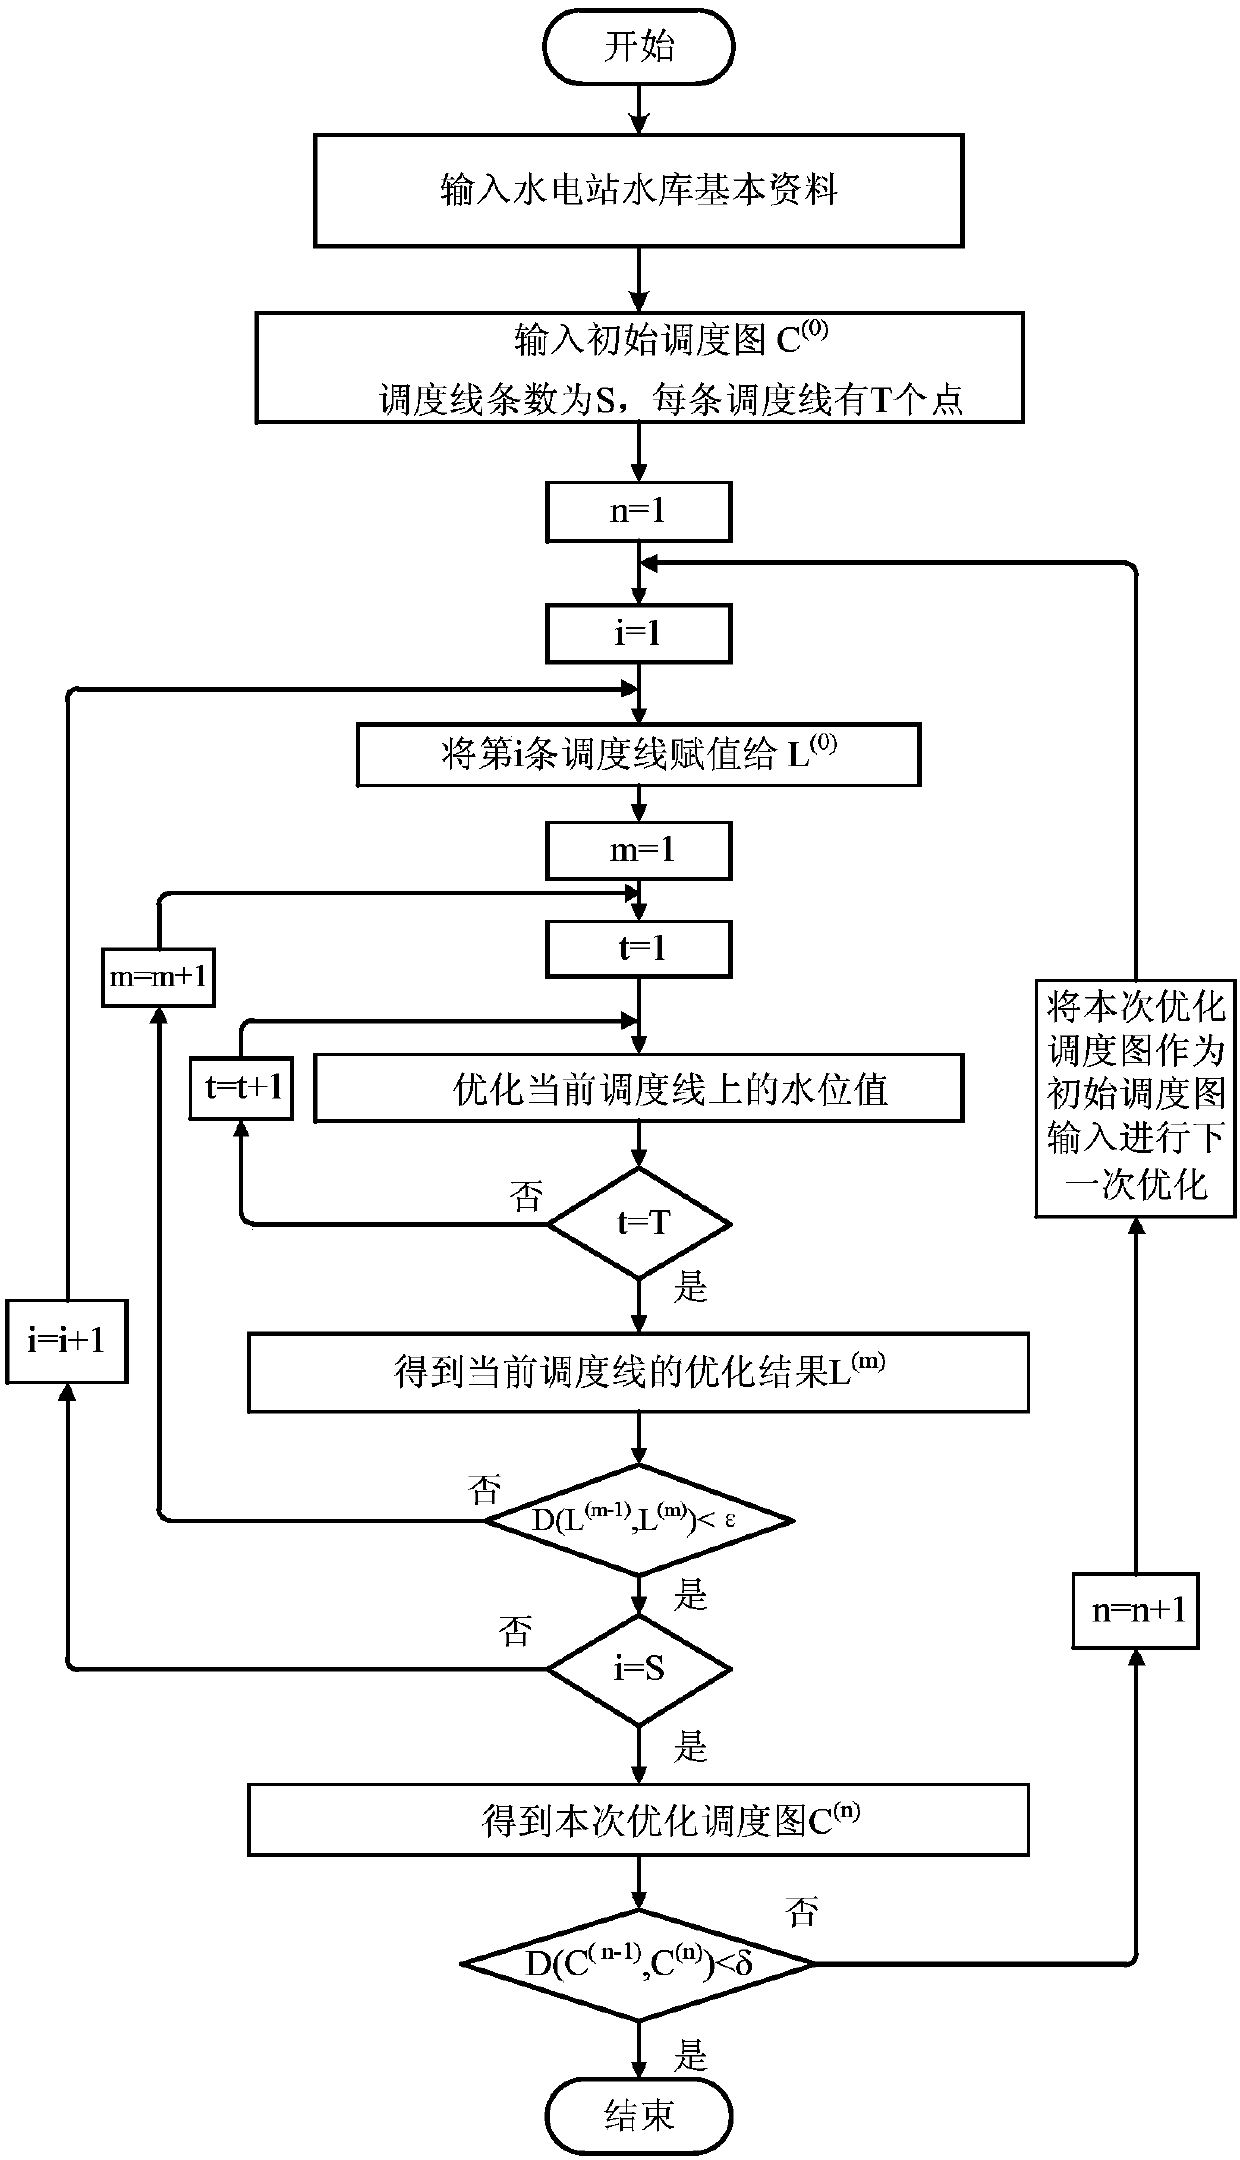 Reservoir operation-for-beneficial-use chart optimization method considering ecological protection needs